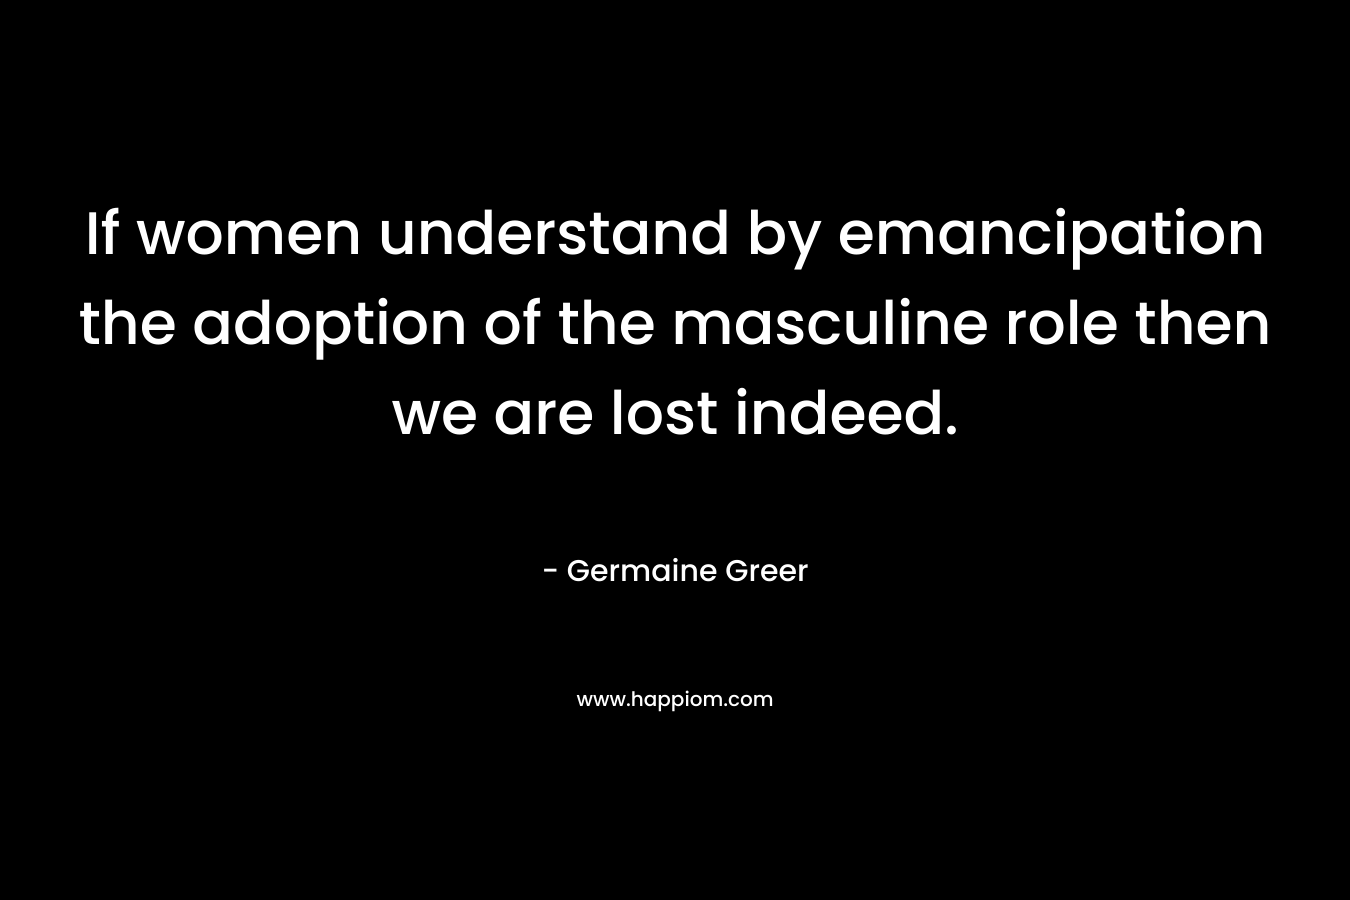 If women understand by emancipation the adoption of the masculine role then we are lost indeed. – Germaine Greer